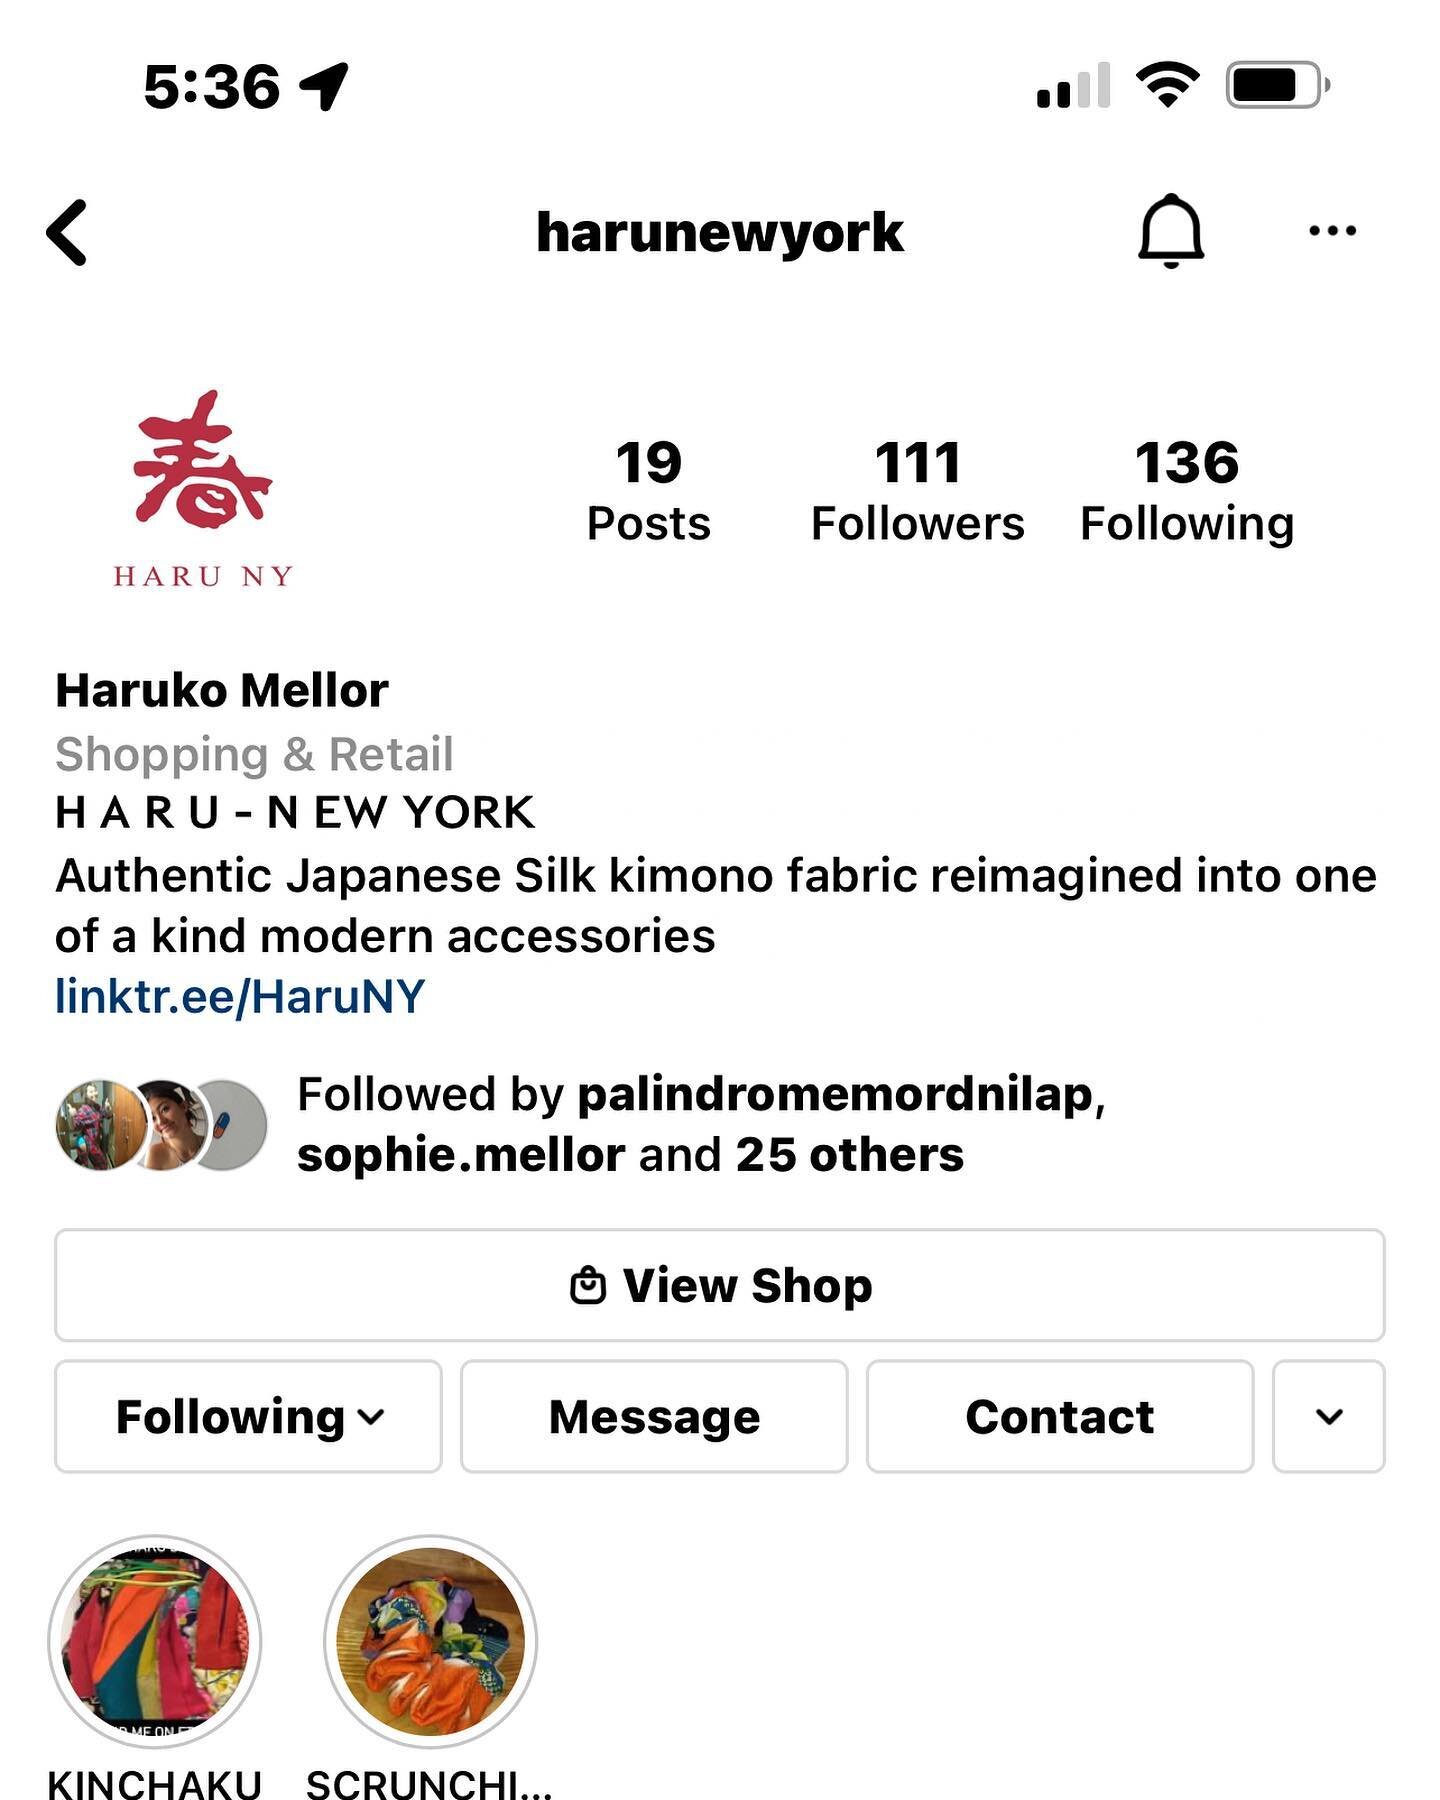 Hello HARU-NY family!! 

I have very exiting news. Our Instagram shop is now live! 

You can find all of the products that are on the website right in the shop!

Feel free to take a look!